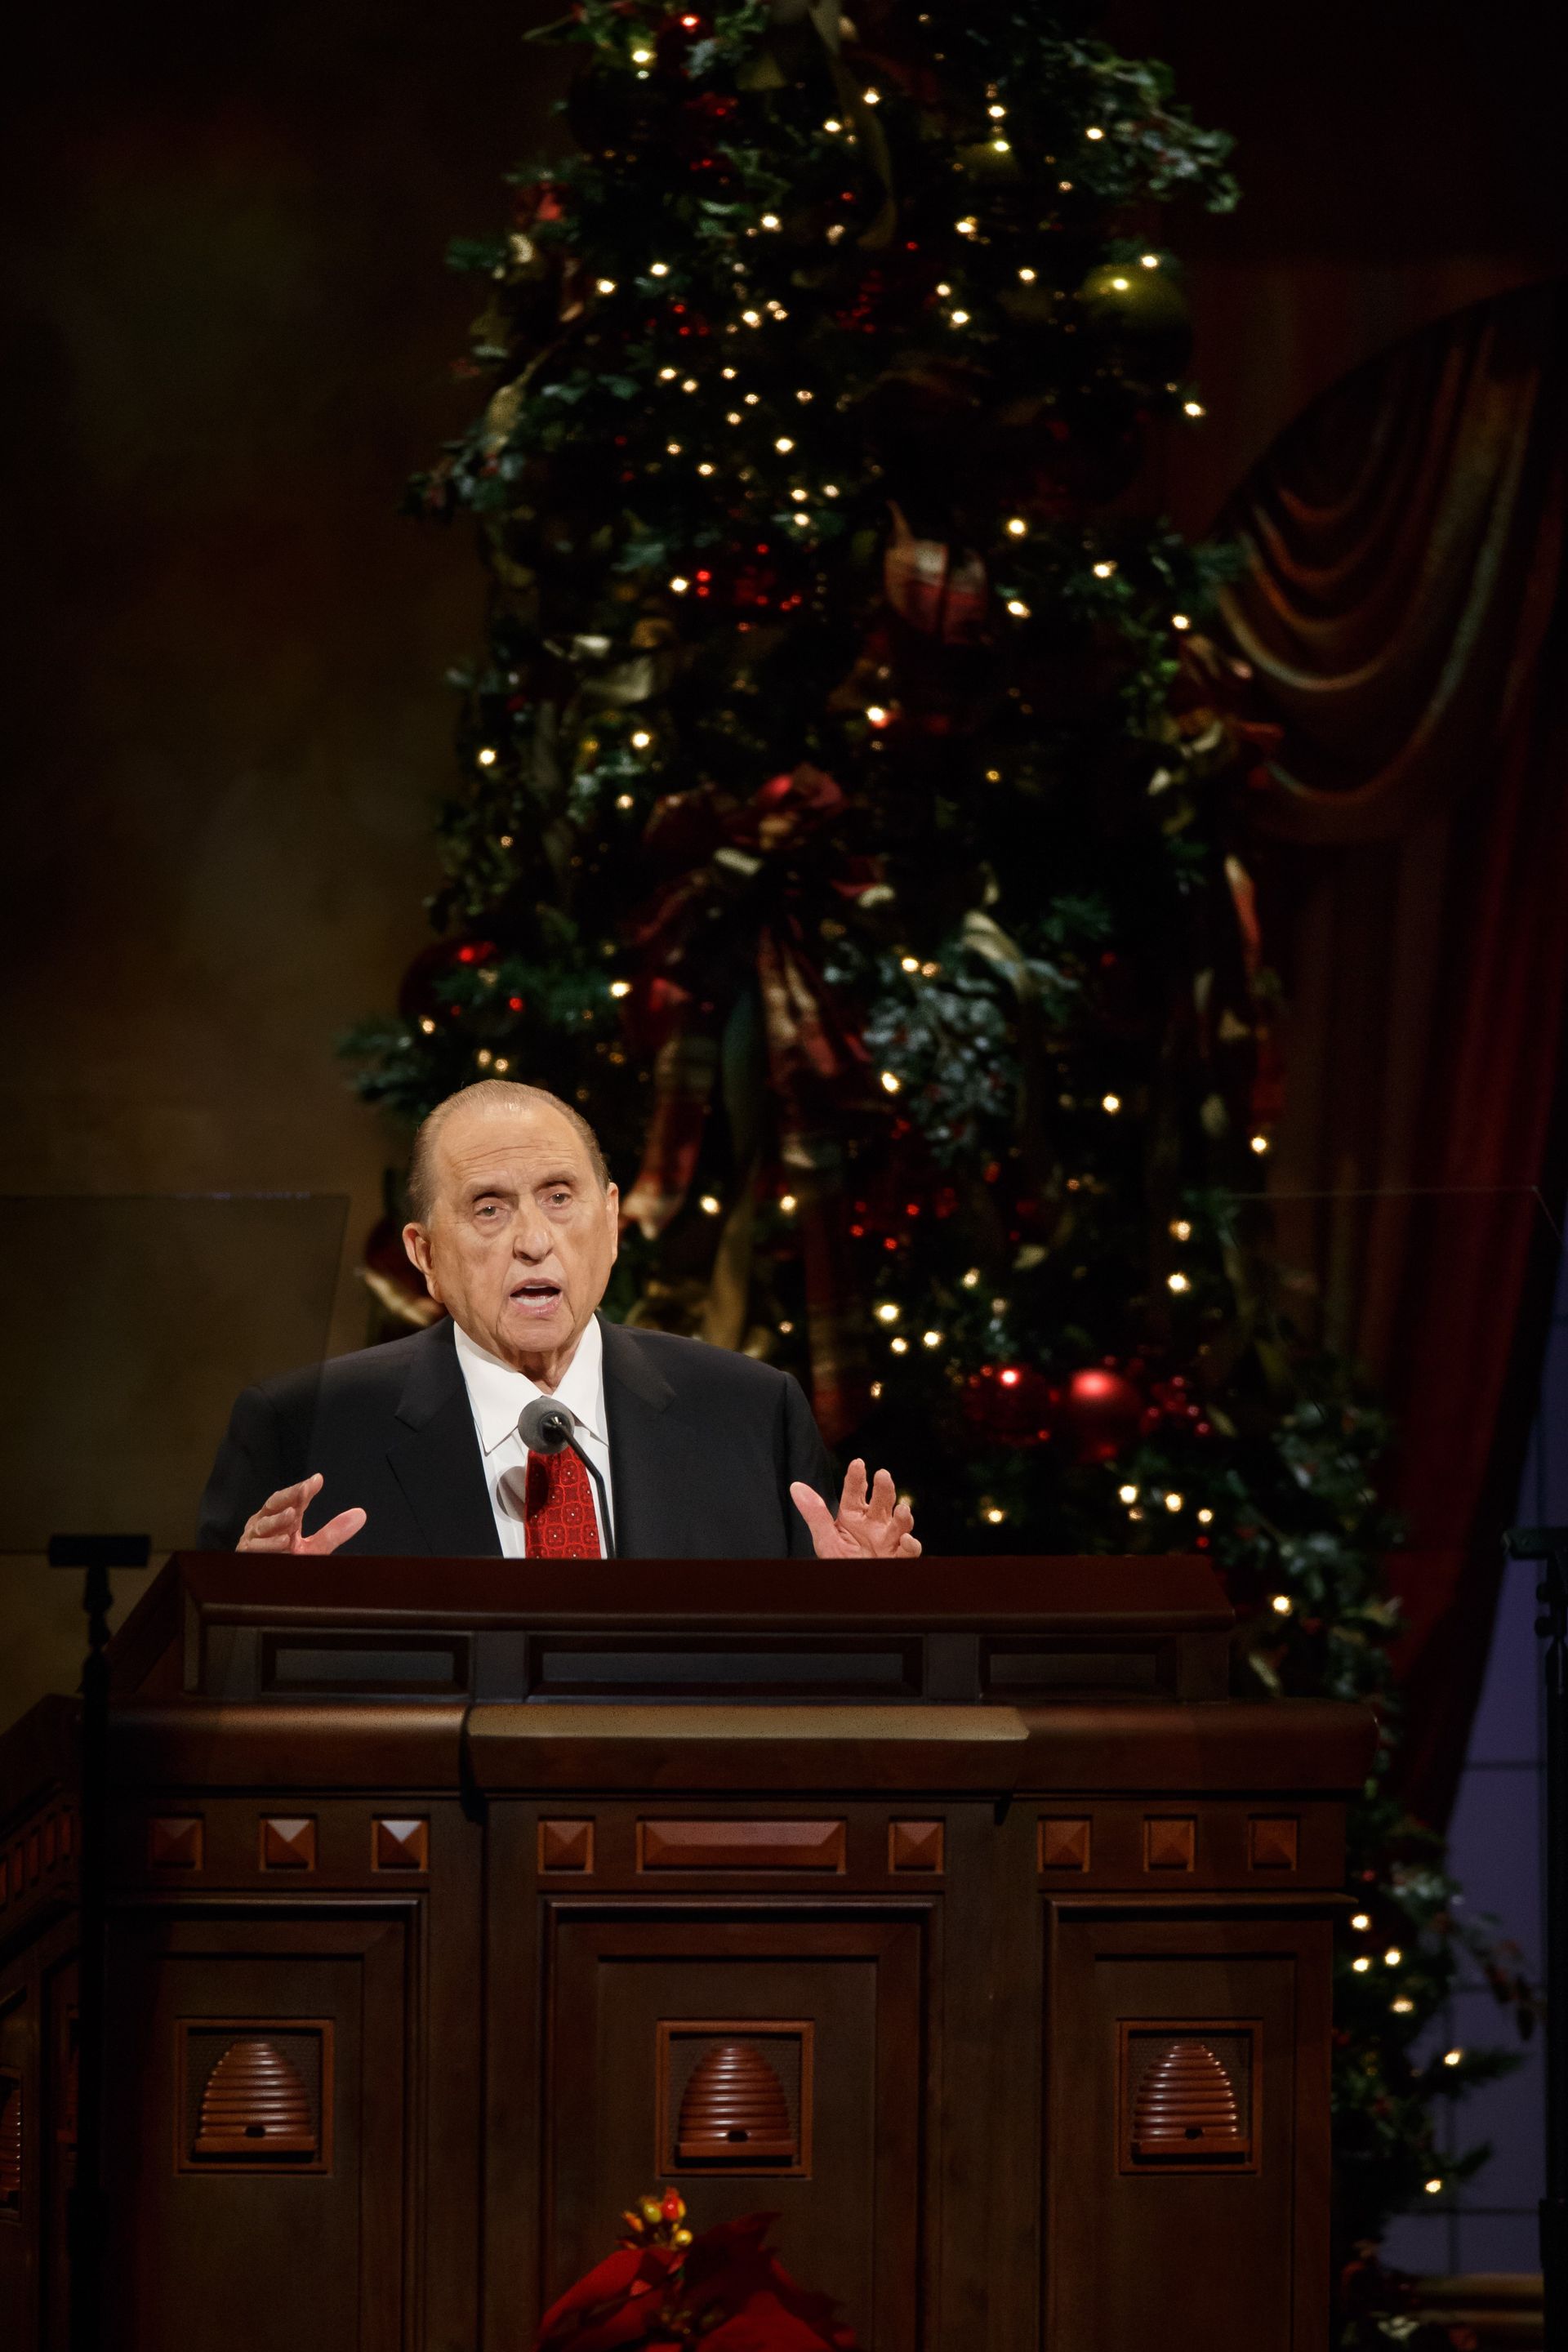 President Monson giving a talk at the First Presidency Christmas Devotional.